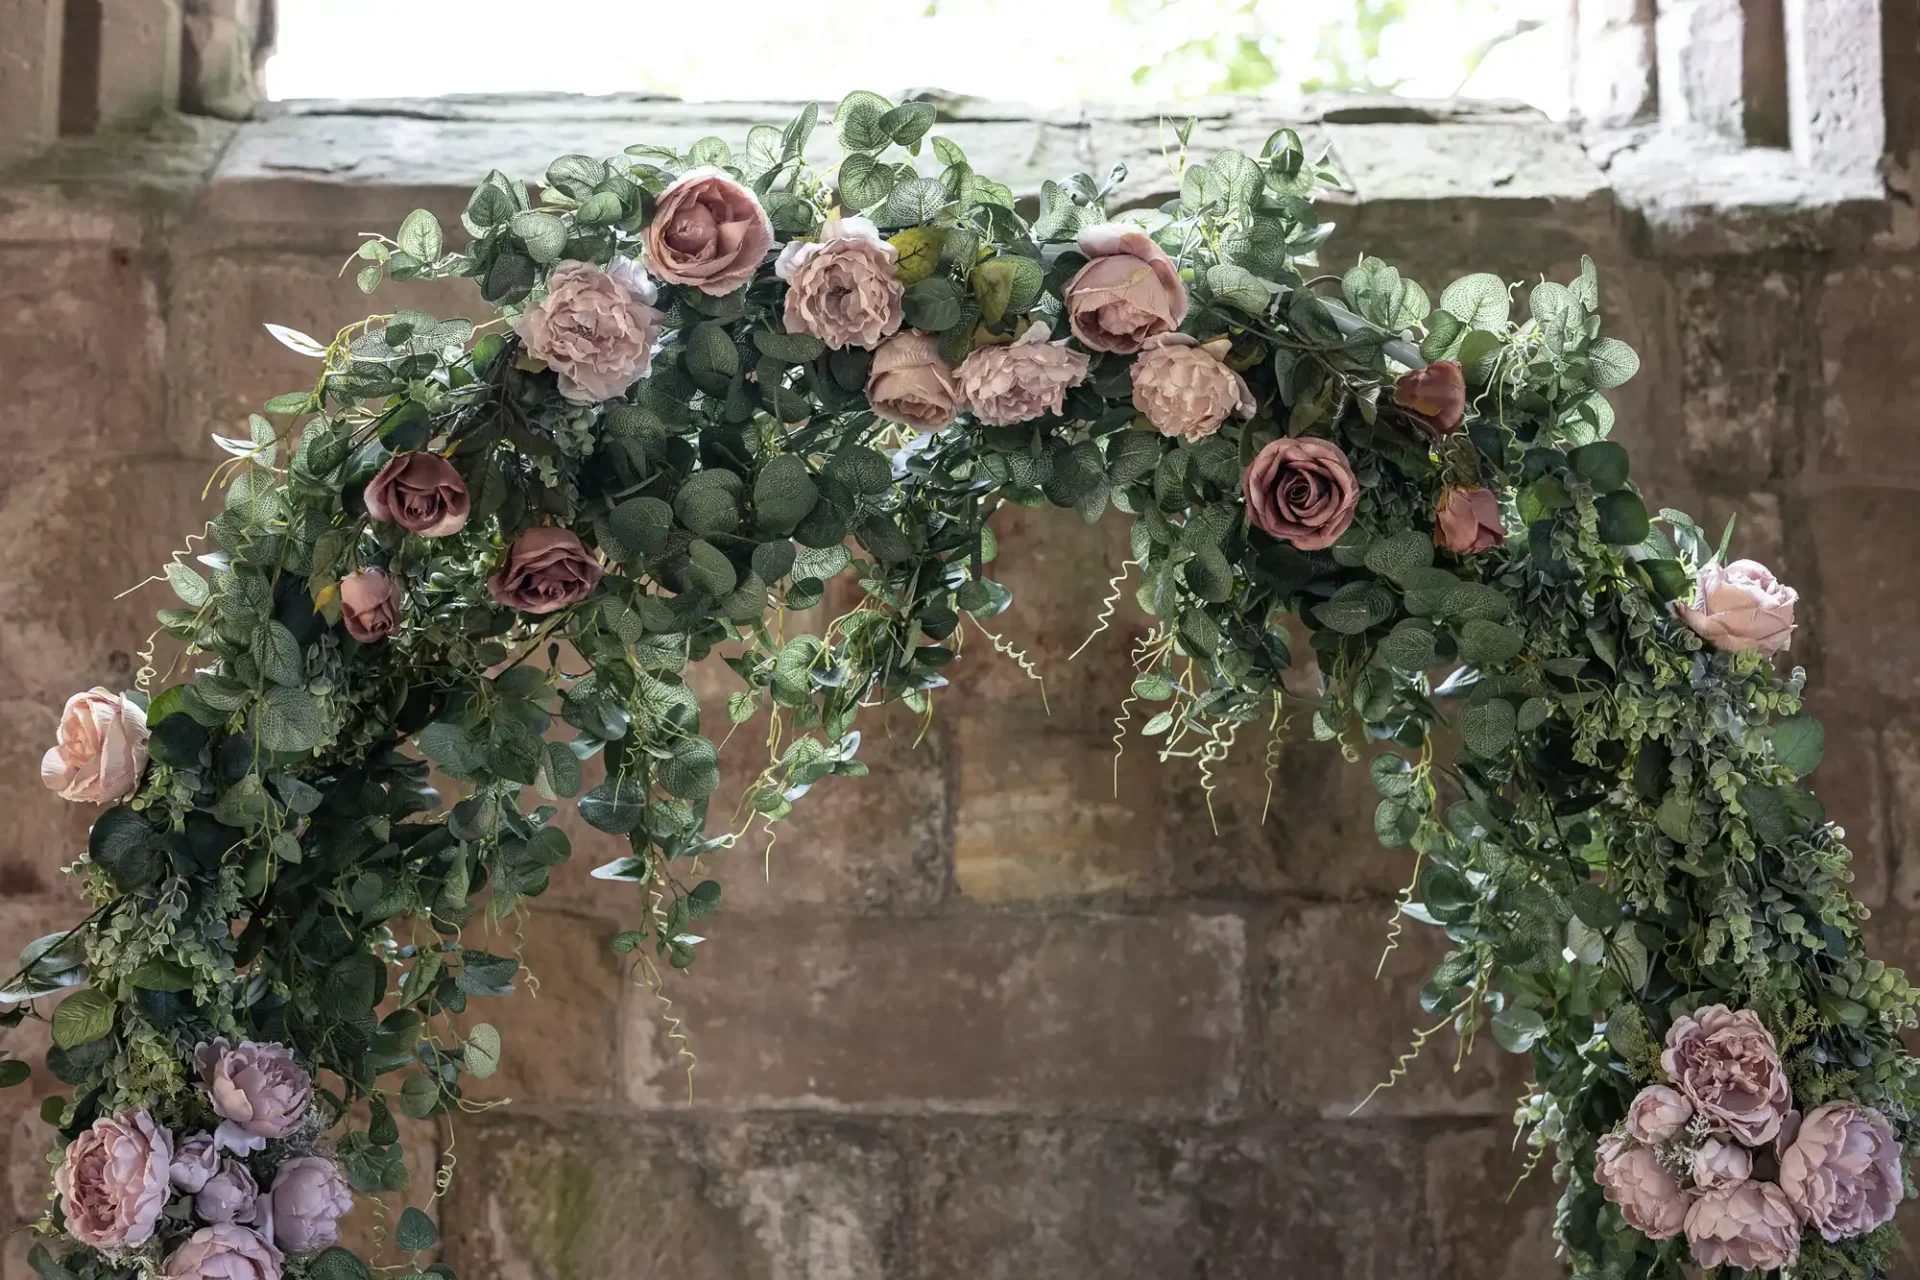 Arch-shaped floral arrangement with pink and cream roses integrated with green ivy leaves, set against a stone wall background.